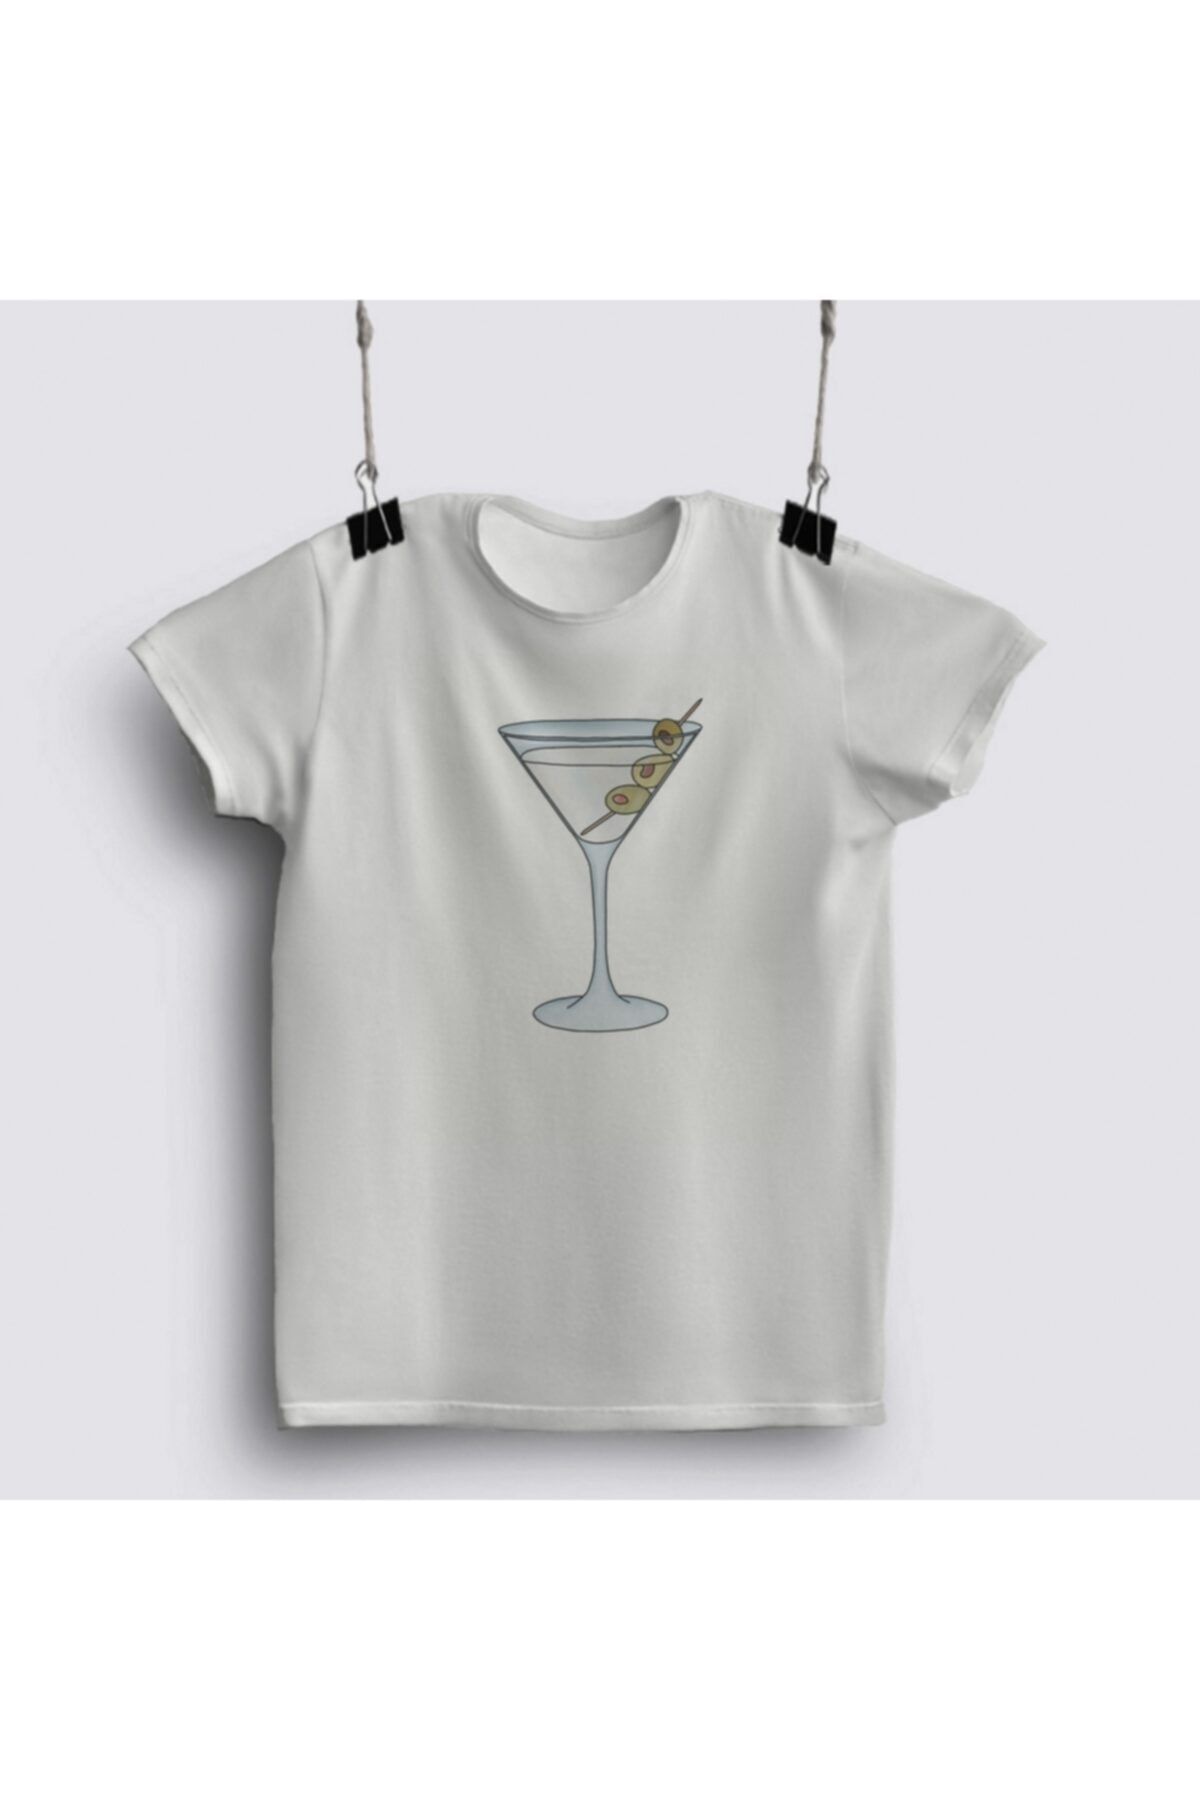 Fizello Vintage Mint Green Martini With Olives T-shirt